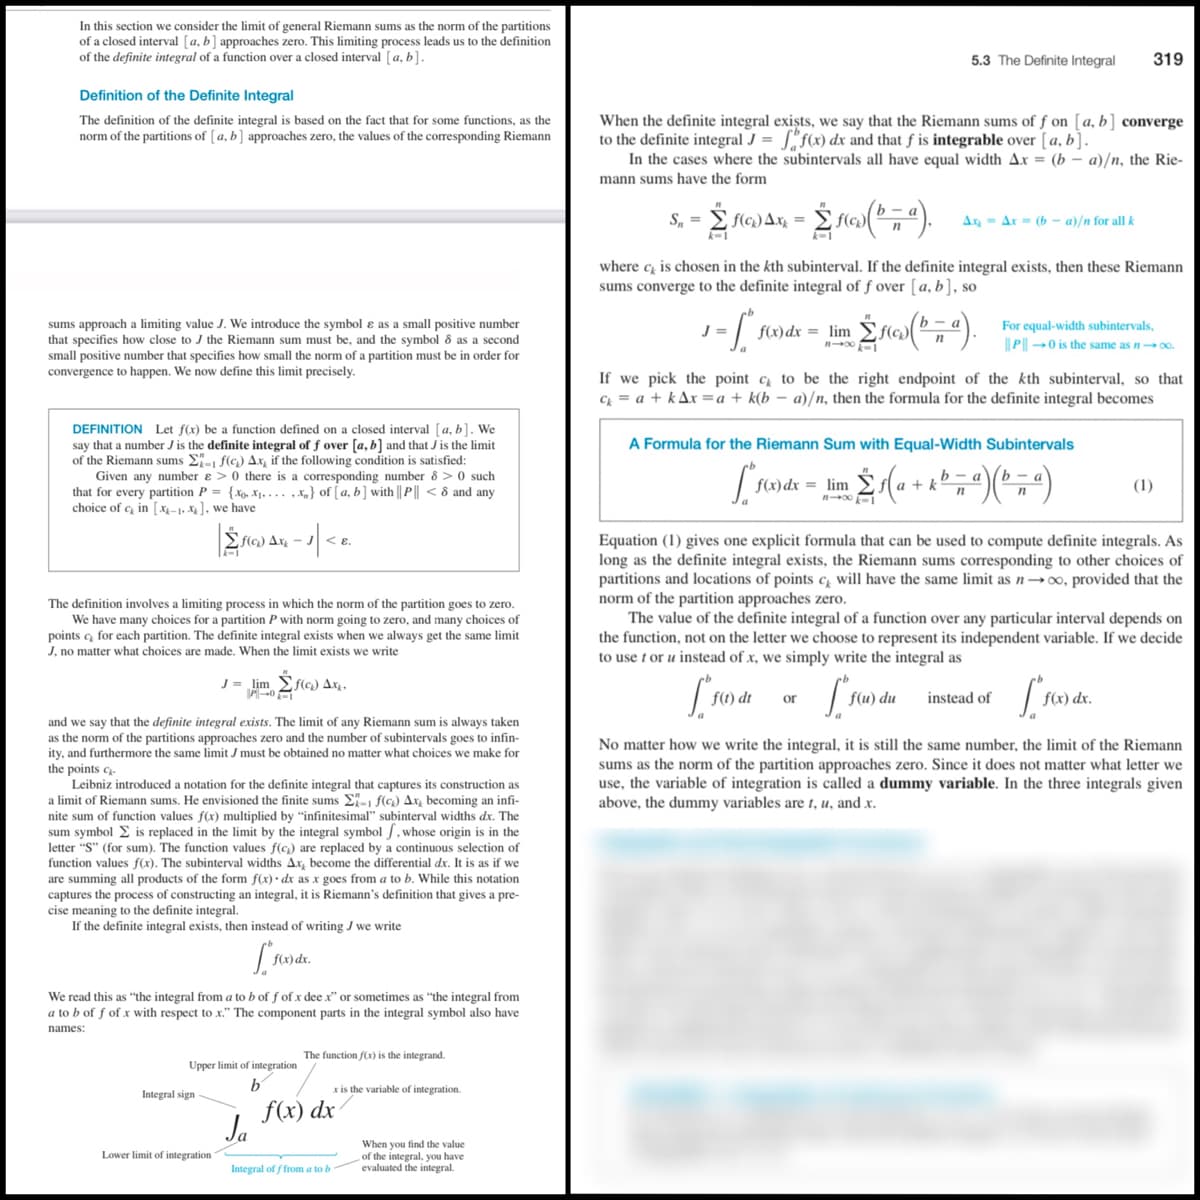 In this section we consider the limit of general Riemann sums as the norm of the partitions
of a closed interval [a, b] approaches zero. This limiting process leads us to the definition
of the definite integral of a function over a closed interval [a, b].
5.3 The Definite Integral
319
Definition of the Definite Integral
When the definite integral exișts, we say that the Riemann sums of ƒ on [a, b] converge
to the definite integral J = ["f(x) dx and that f is integrable over [a, b].
In the cases where the subintervals all have equal width Ax = (b – a)/n, the Rie-
The definition of the definite integral is based on the fact that for some functions, as the
norm of the partitions of [ a, b] approaches zero, the values of the corresponding Riemann
mann sums have the form
= E f(c) Ax, =
Ax = Ar = (b – a)/n for all k
k-1
k-1
where c is chosen in the kth subinterval. If the definite integral exists, then these Riemann
sums converge to the definite integral of f over [a, b], so
ь — а
sums approach a limiting value J. We introduce the symbol ɛ as a small positive number
that specifies how close to J the Riemann sum must be, and the symbol 8 as a second
small positive number that specifies how small the norm of a partition must be in order for
convergence to happen. We now define this limit precisely.
For equal-width subintervals,
||P| 0 is the same as n- 0.
J =
f(x)dx = lim
k-1
If we pick the point c to be the right endpoint of the kth subinterval, so that
C = a + kAx =a + k(b – a)/n, then the formula for the definite integral becomes
DEFINITION Let f(x) be a function defined on a closed interval [a, b]. We
say that a number J is the definite integral of f over [a, b] and that J is the limit
of the Riemann sums E- f(c) Ax, if the following condition is satisfied:
Given any number e > 0 there is a corresponding number 8 > 0 such
that for every partition P = {xg, X1. . .. ,x,} of [ a, b] with || P || < 8 and any
choice of c in [X-1. X], we have
A Formula for the Riemann Sum with Equal-Width Subintervals
f(x) dx = lim
b
+ k
(1)
flo) Ax, -
-1
Equation (1) gives one explicit formula that can be used to compute definite integrals. As
long as the definite integral exists, the Riemann sums corresponding to other choices of
partitions and locations of points c̟ will have the same limit as n–∞, provided that the
norm of the partition approaches zero.
The value of the definite integral of a function over any particular interval depends on
the function, not on the letter we choose to represent its independent variable. If we decide
to use t or u instead of x, we simply write the integral as
The definition involves a limiting process in which the norm of the partition goes to zero.
We have many choices for a partition P with norm going to zero, and many choices of
points c for each partition. The definite integral exists when we always get the same limit
J, no matter what choices are made. When the limit exists we write
lim
Efla) Ax,
f(1) dt
f(u) du
instead of
or
I we say that the definite integral exists. The limit of any Riemann sum is always taken
as the norm of the partitions approaches zero and the number of subintervals goes to infin-
ity, and furthermore the same limit J must be obtained no matter what choices
and
No matter how we write the integral, it is still the same number, the limit of the Riemann
sums as the norm of the partition approaches zero. Since it does not matter what letter we
use, the variable of integration is called a dummy variable. In the three integrals given
above, the dummy variables are 1, u, and x.
make for
the points c-
Leibniz introduced a notation for the definite integral that captures its construction as
a limit of Riemann sums. He envisioned the finite sums E- f(c) Ax, becoming an infi-
nite sum of function values f(x) multiplied by "infinitesimal" subinterval widths dx. The
sum symbol E is replaced in the limit by the integral symbol /, whose origin is in the
letter "S" (for sum). The function values f(c) are replaced by a continuous selection of
function values f(x). The subinterval widths Ax, become the differential dx. It is as if we
are summing all products of the form f(x)· dx as x goes from a to b. While this notation
captures the process of constructing an integral, it is Riemann's definition that gives a pre-
cise meaning to the definite integral.
If the definite integral exists, then instead of writing J we write
f(x) dx.
We read this as "the integral from a to b of f of x dee x" or sometimes as "the integral from
a to b of f of x with respect to x." The component parts in the integral symbol also have
names:
The function f(x) is the integrand.
Upper limit of integration
b'
x is the variable of integration.
Integral sign
f(x) dx
Ja
When you find the value
of the integral, you have
evaluated the integral.
Lower limit of integration
Integral of f from a to b
